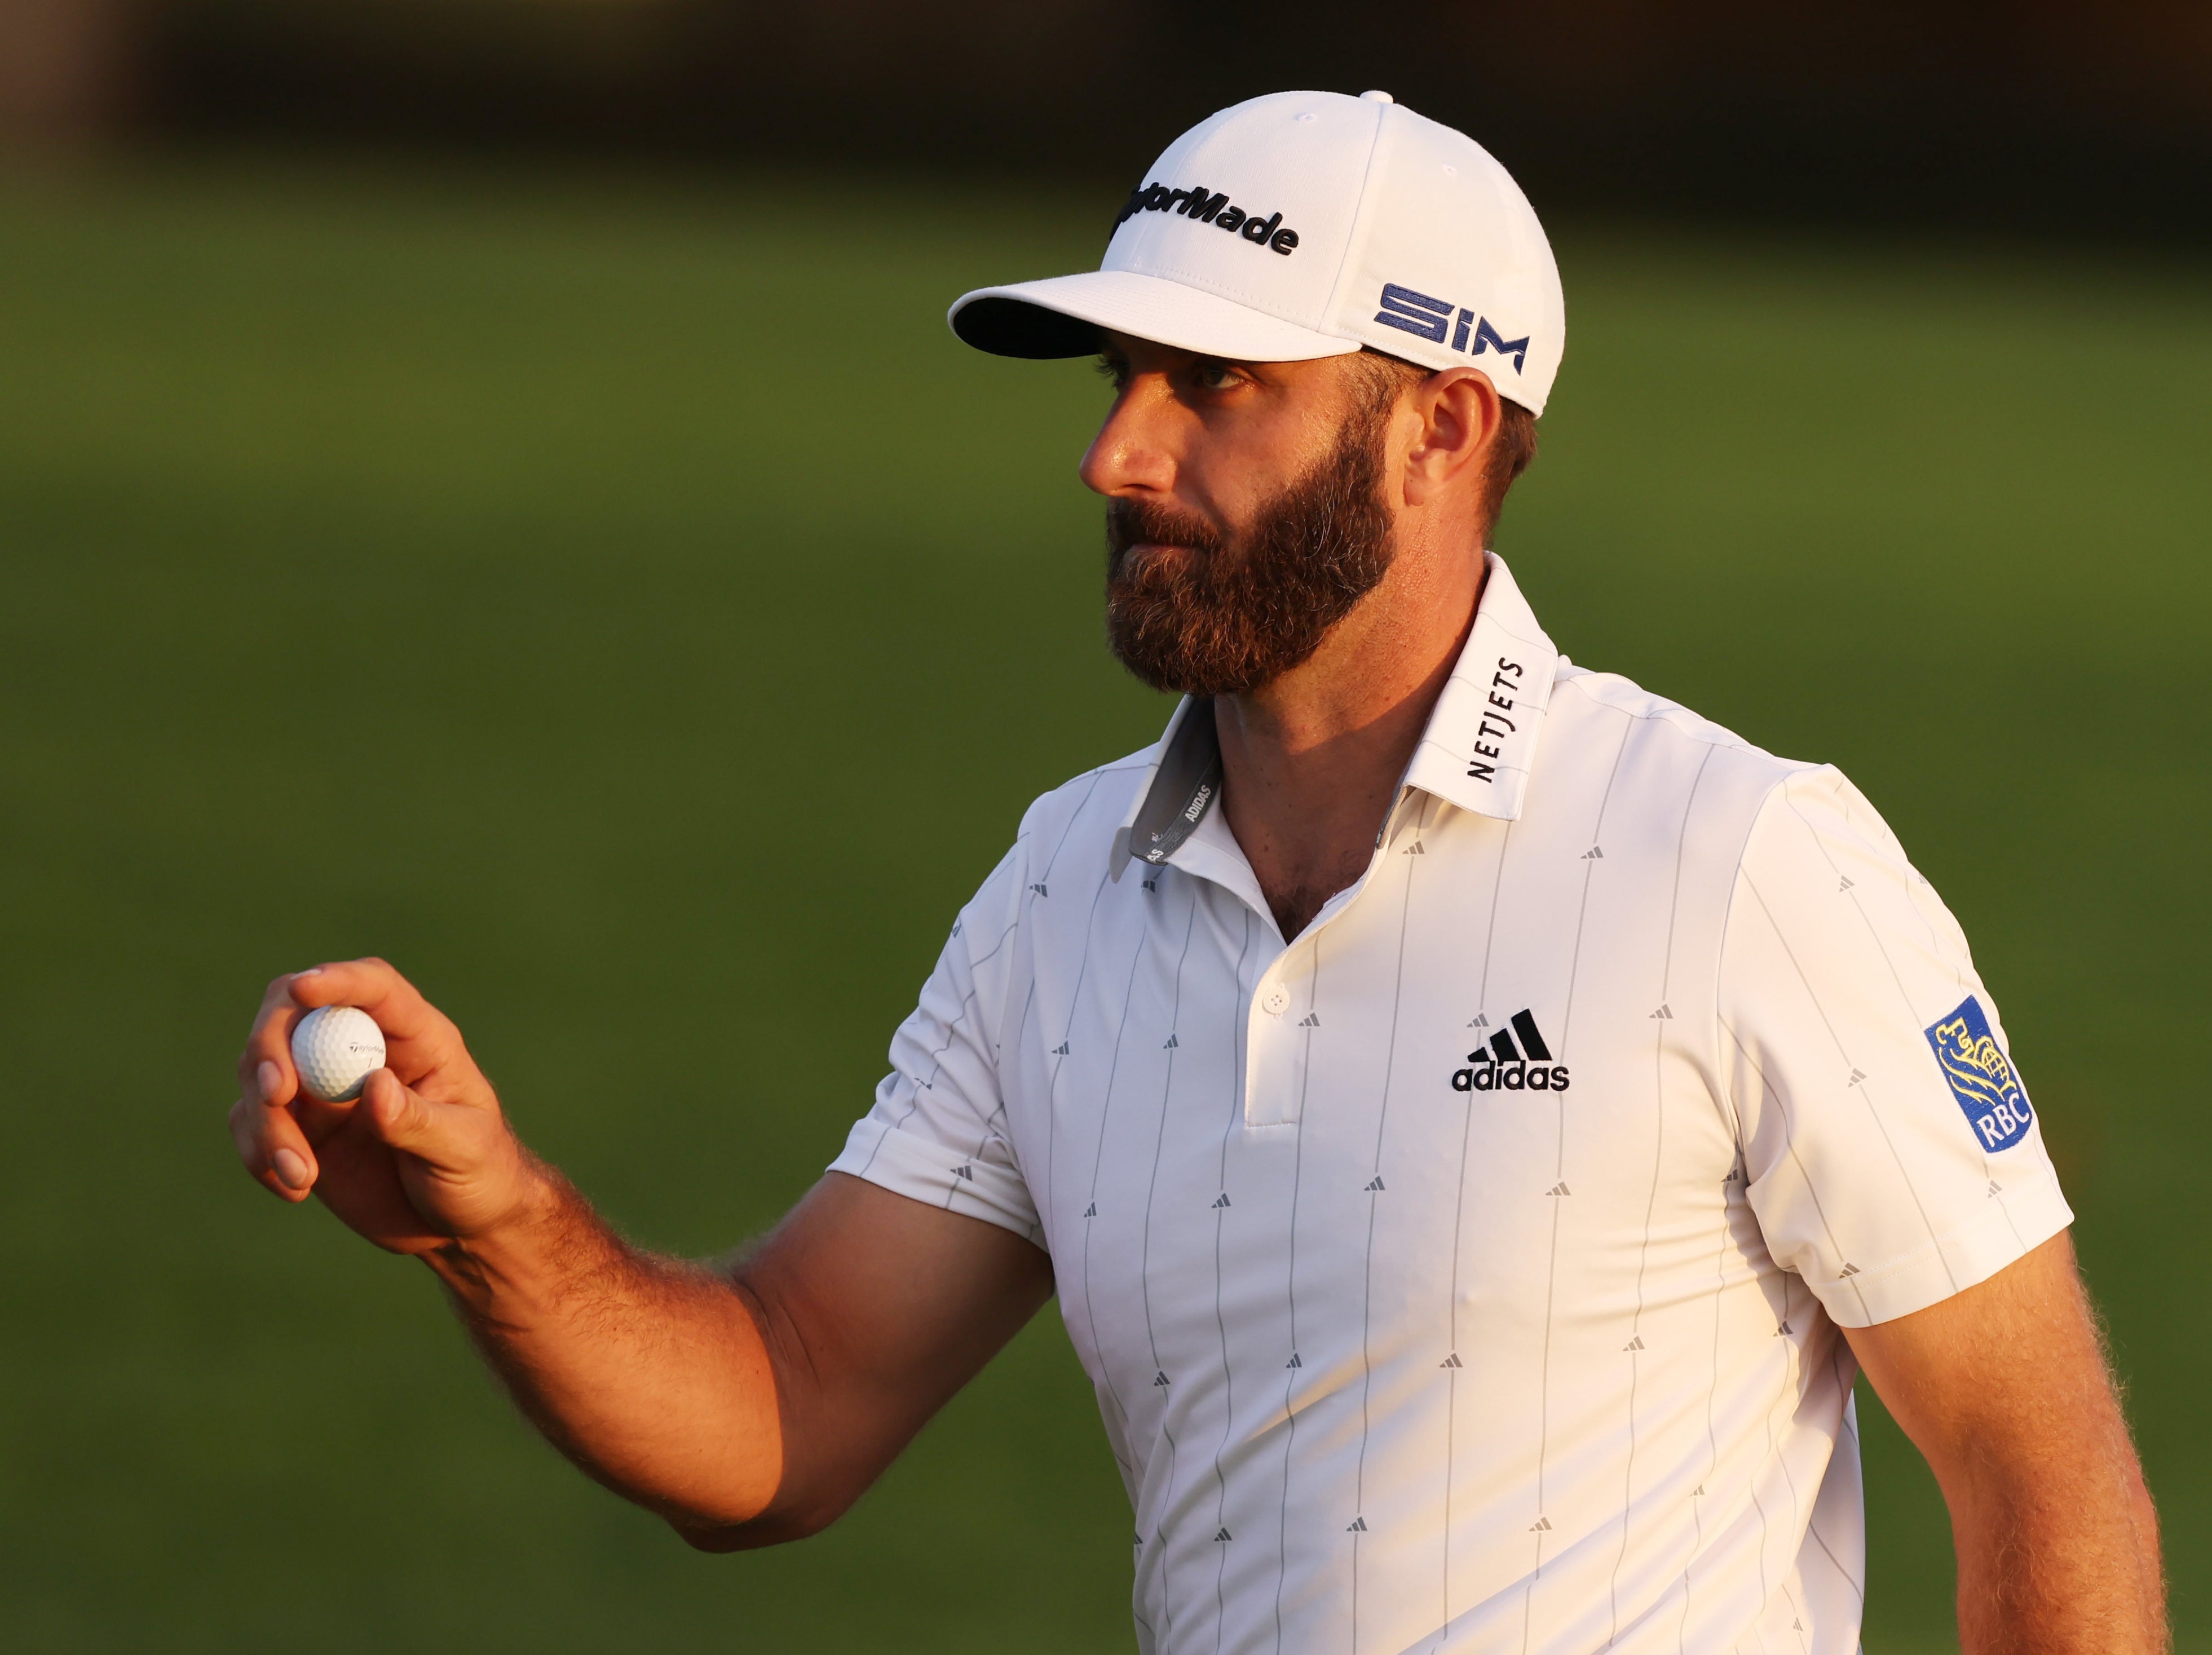 Dustin Johnson is in pole position to claim the Green Jacket